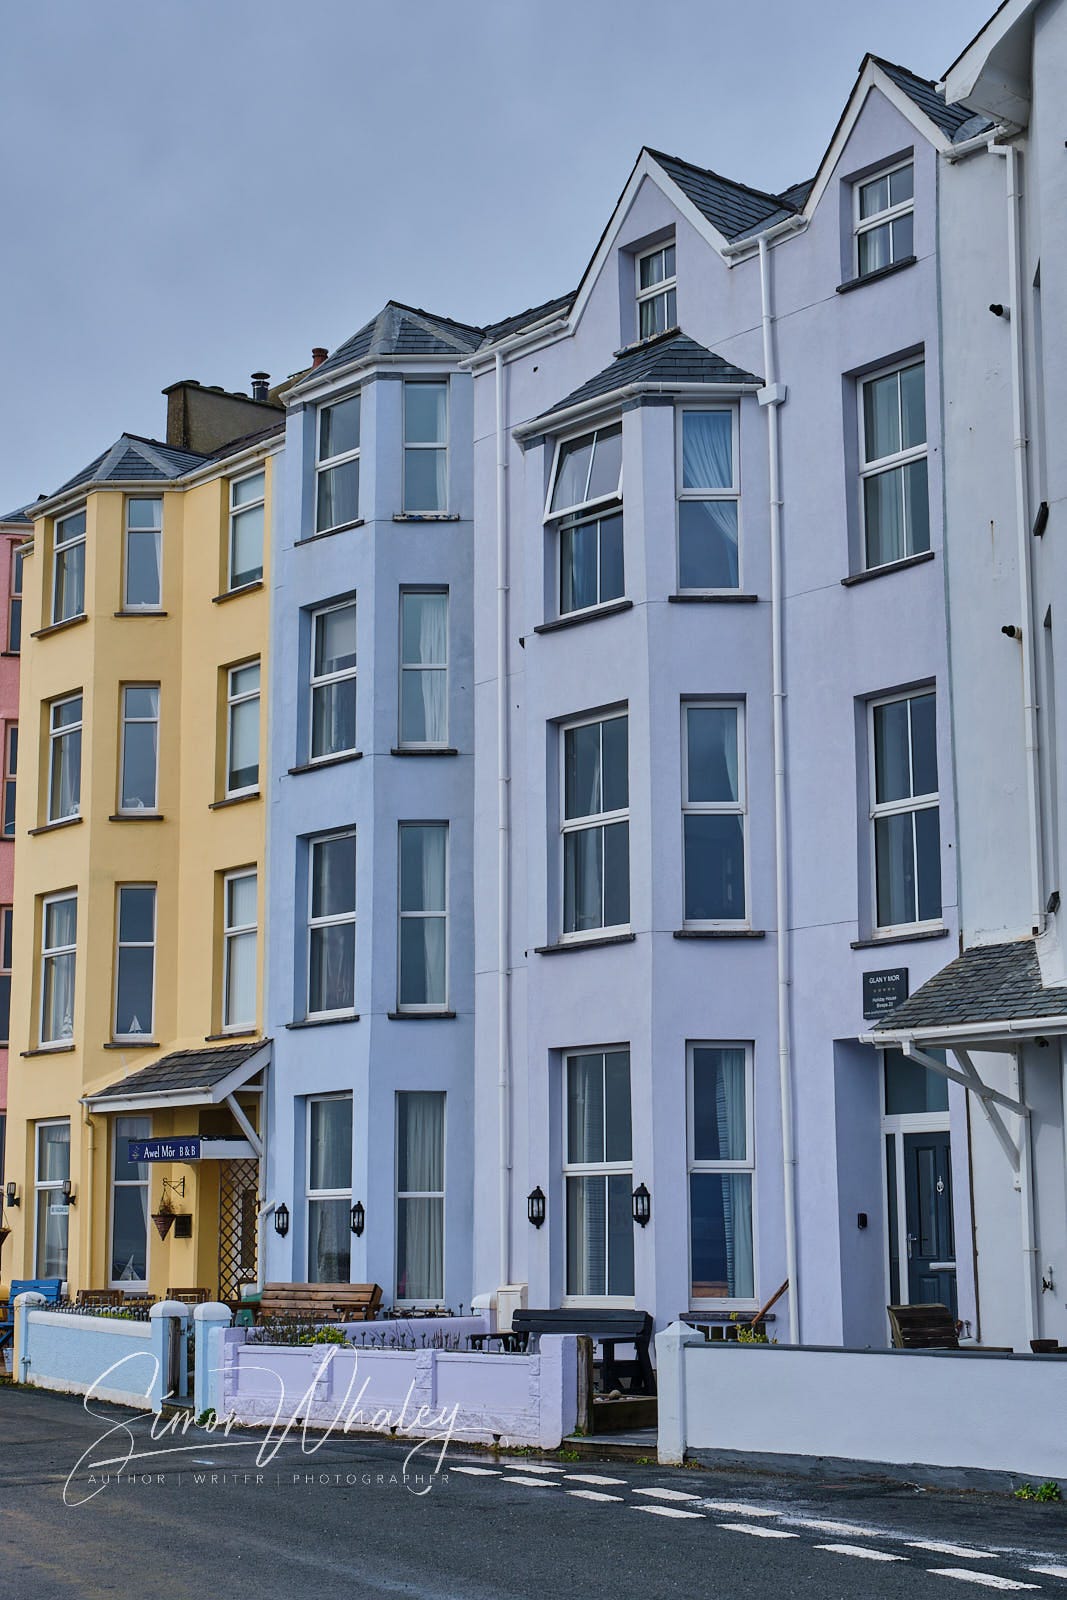 A terrace of four storey properties lining the seafront at Criccieth, in North Wales